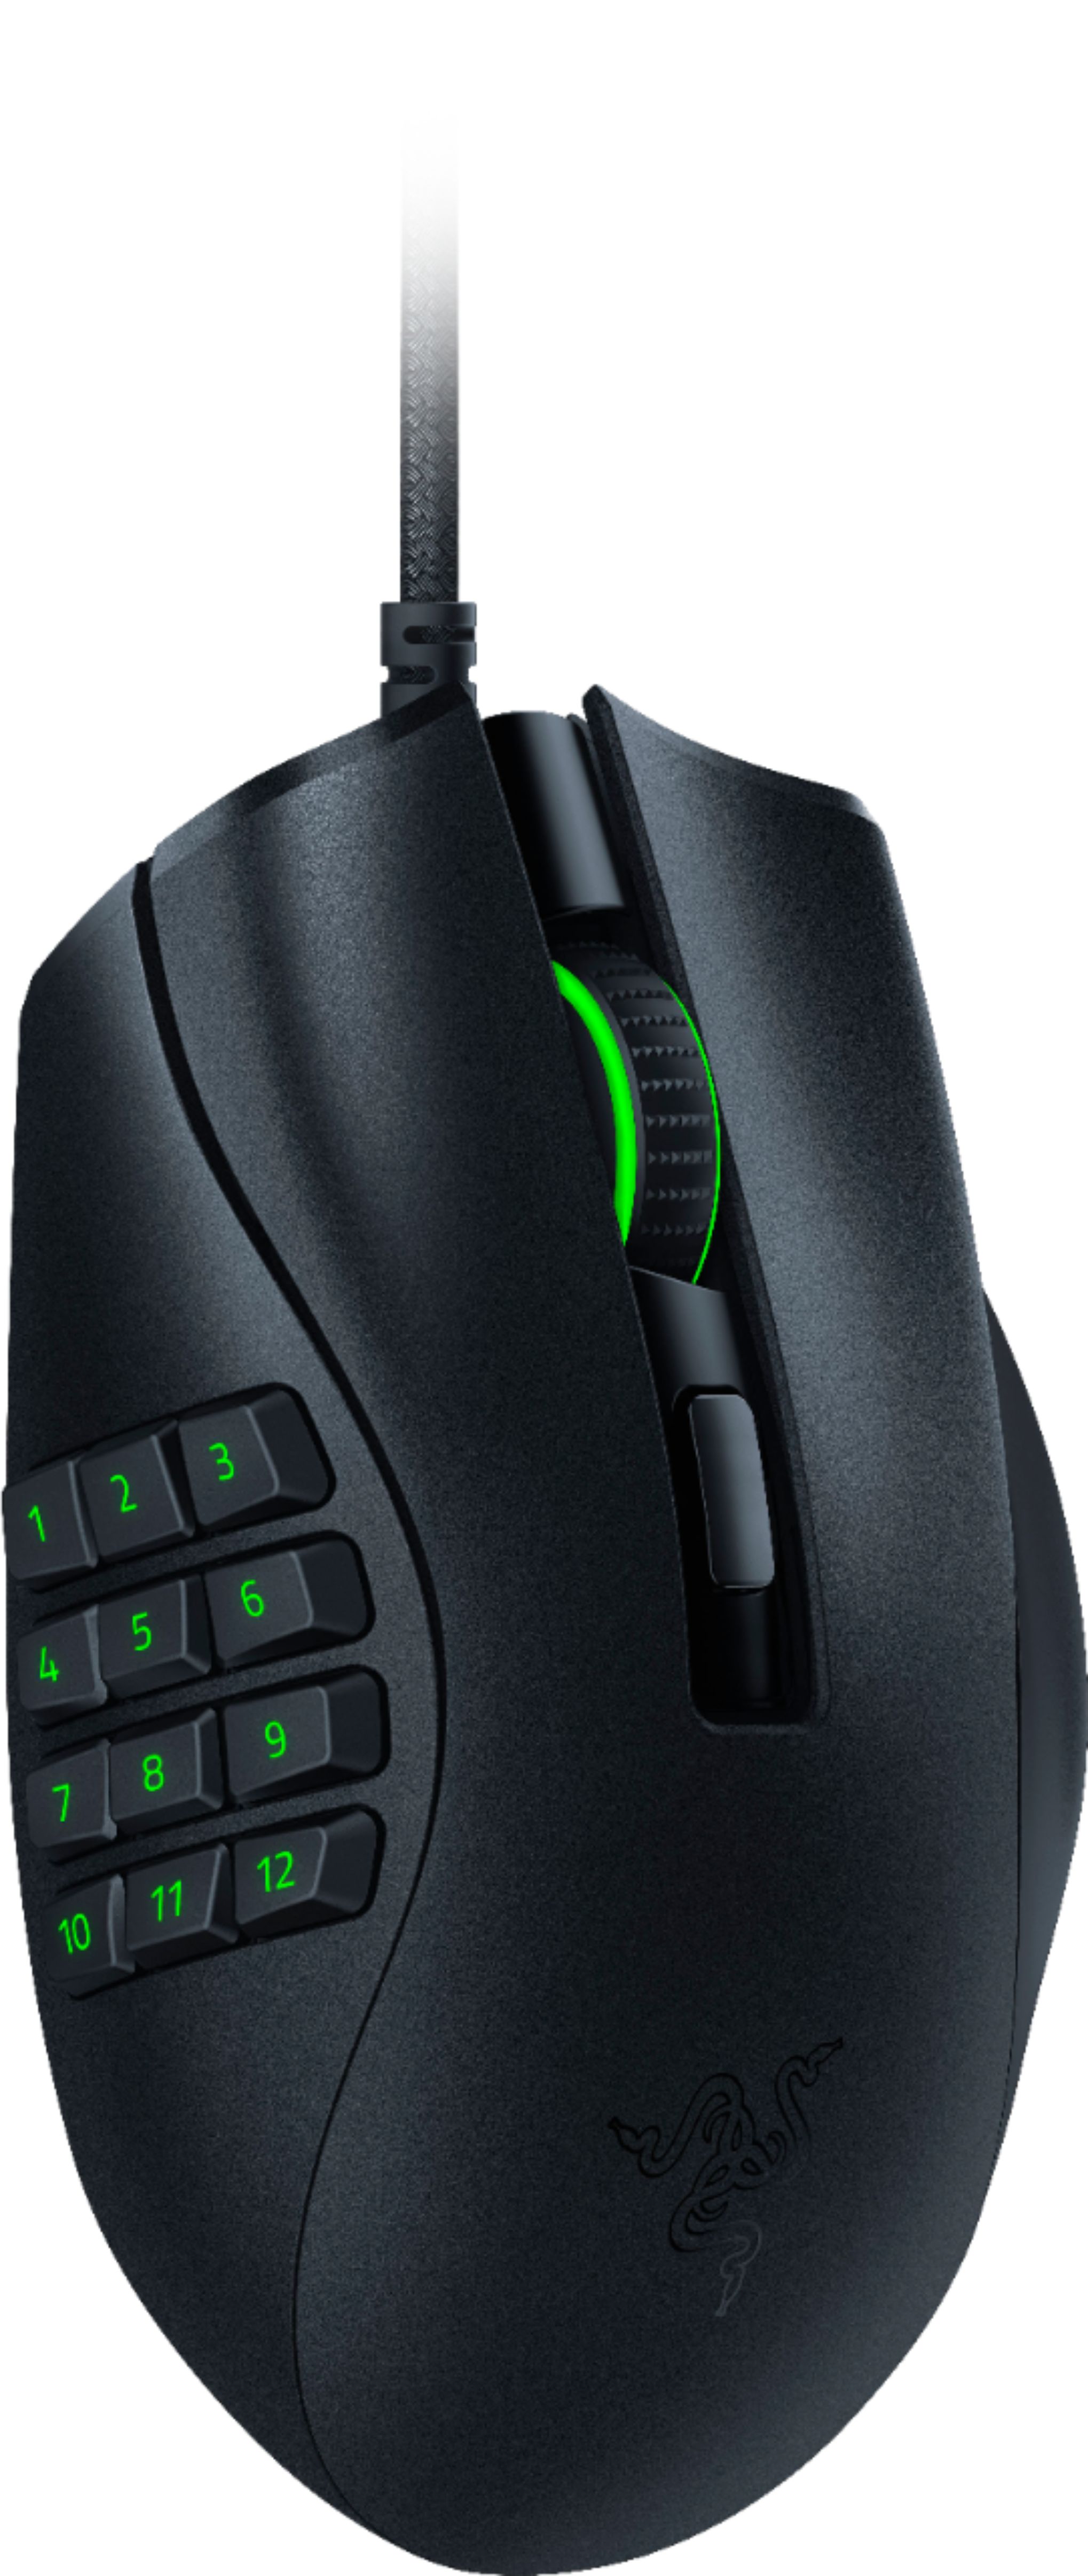 Razer Naga X Mouse Buy Buttons Wired Gaming 16 - Programmable RZ01-03590100-R3U1 Best Optical with Black